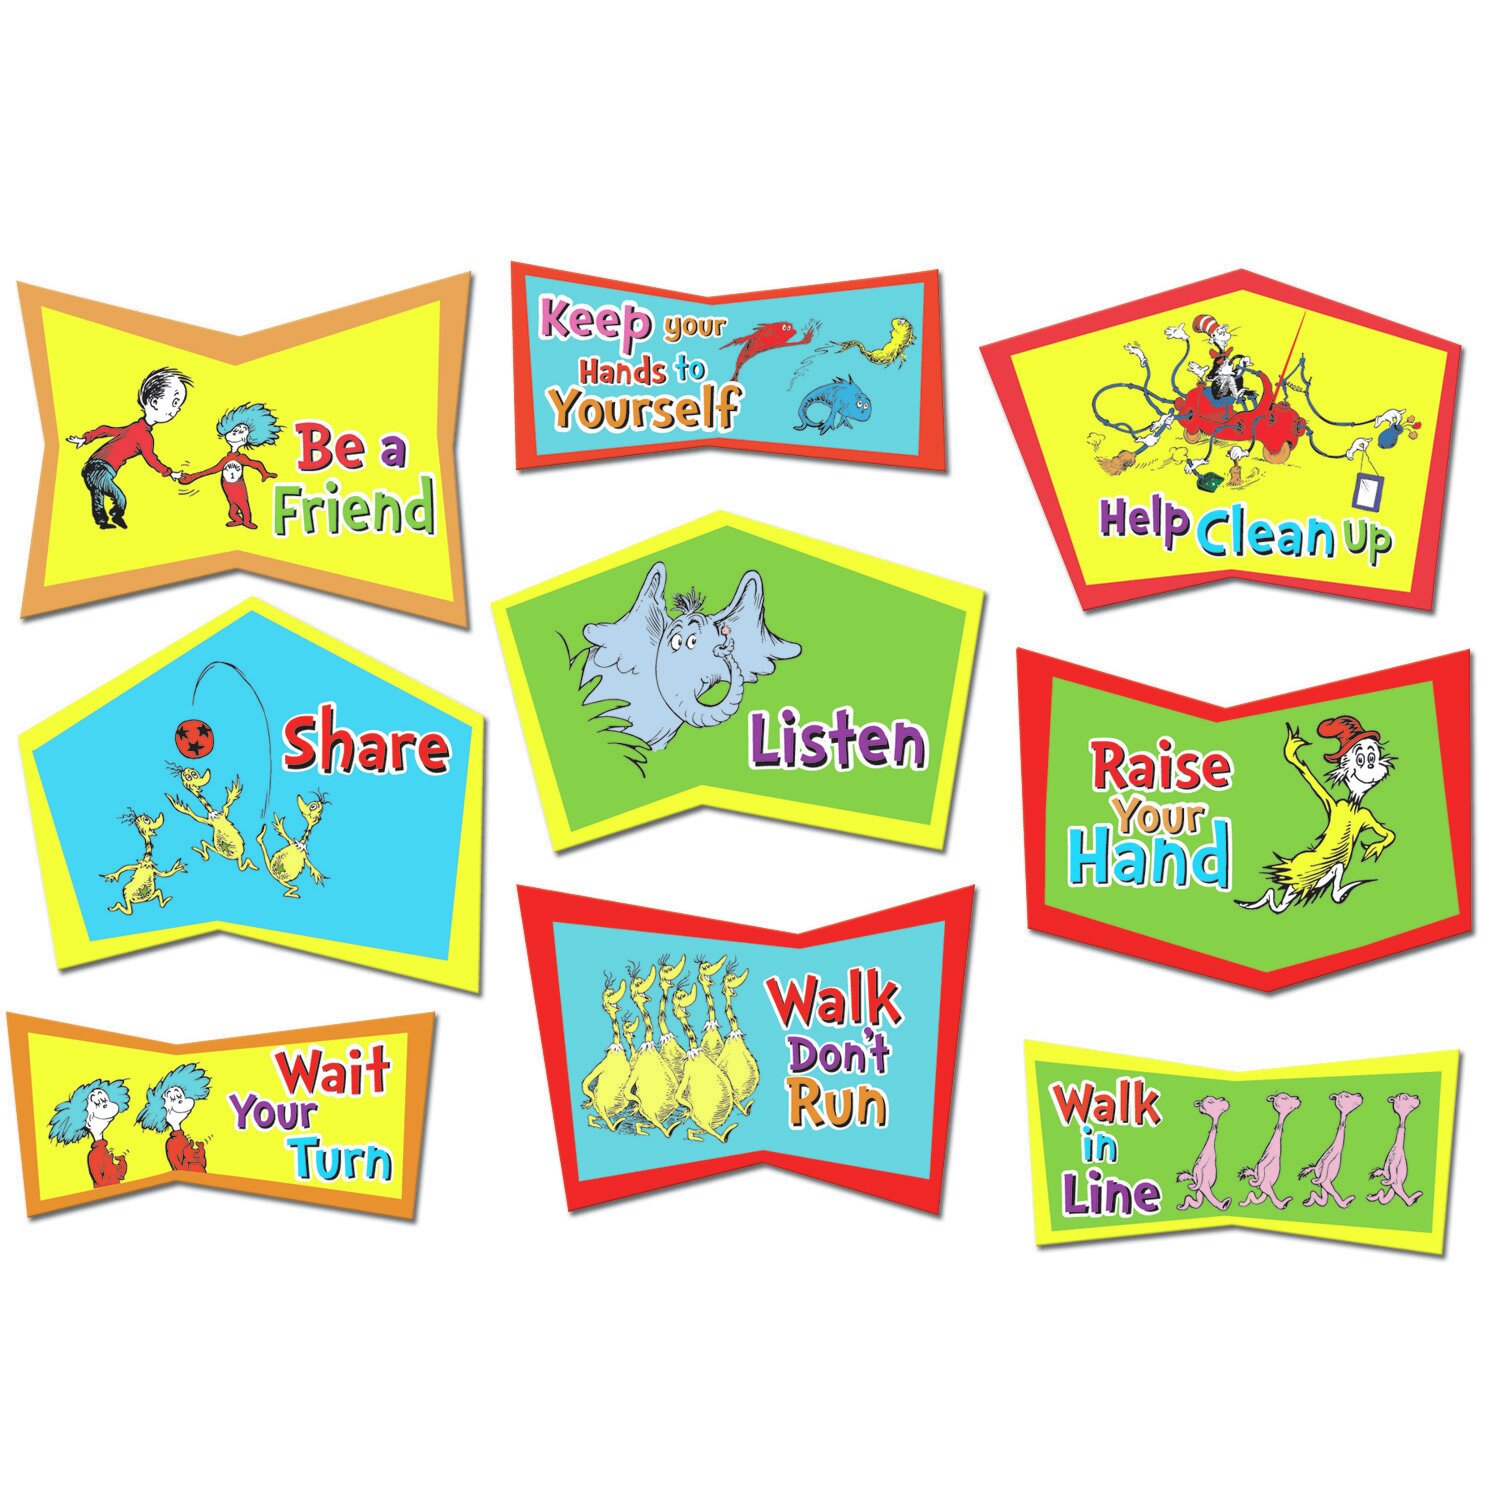 Dr. Seuss themed student tags for behavior chart (picture on